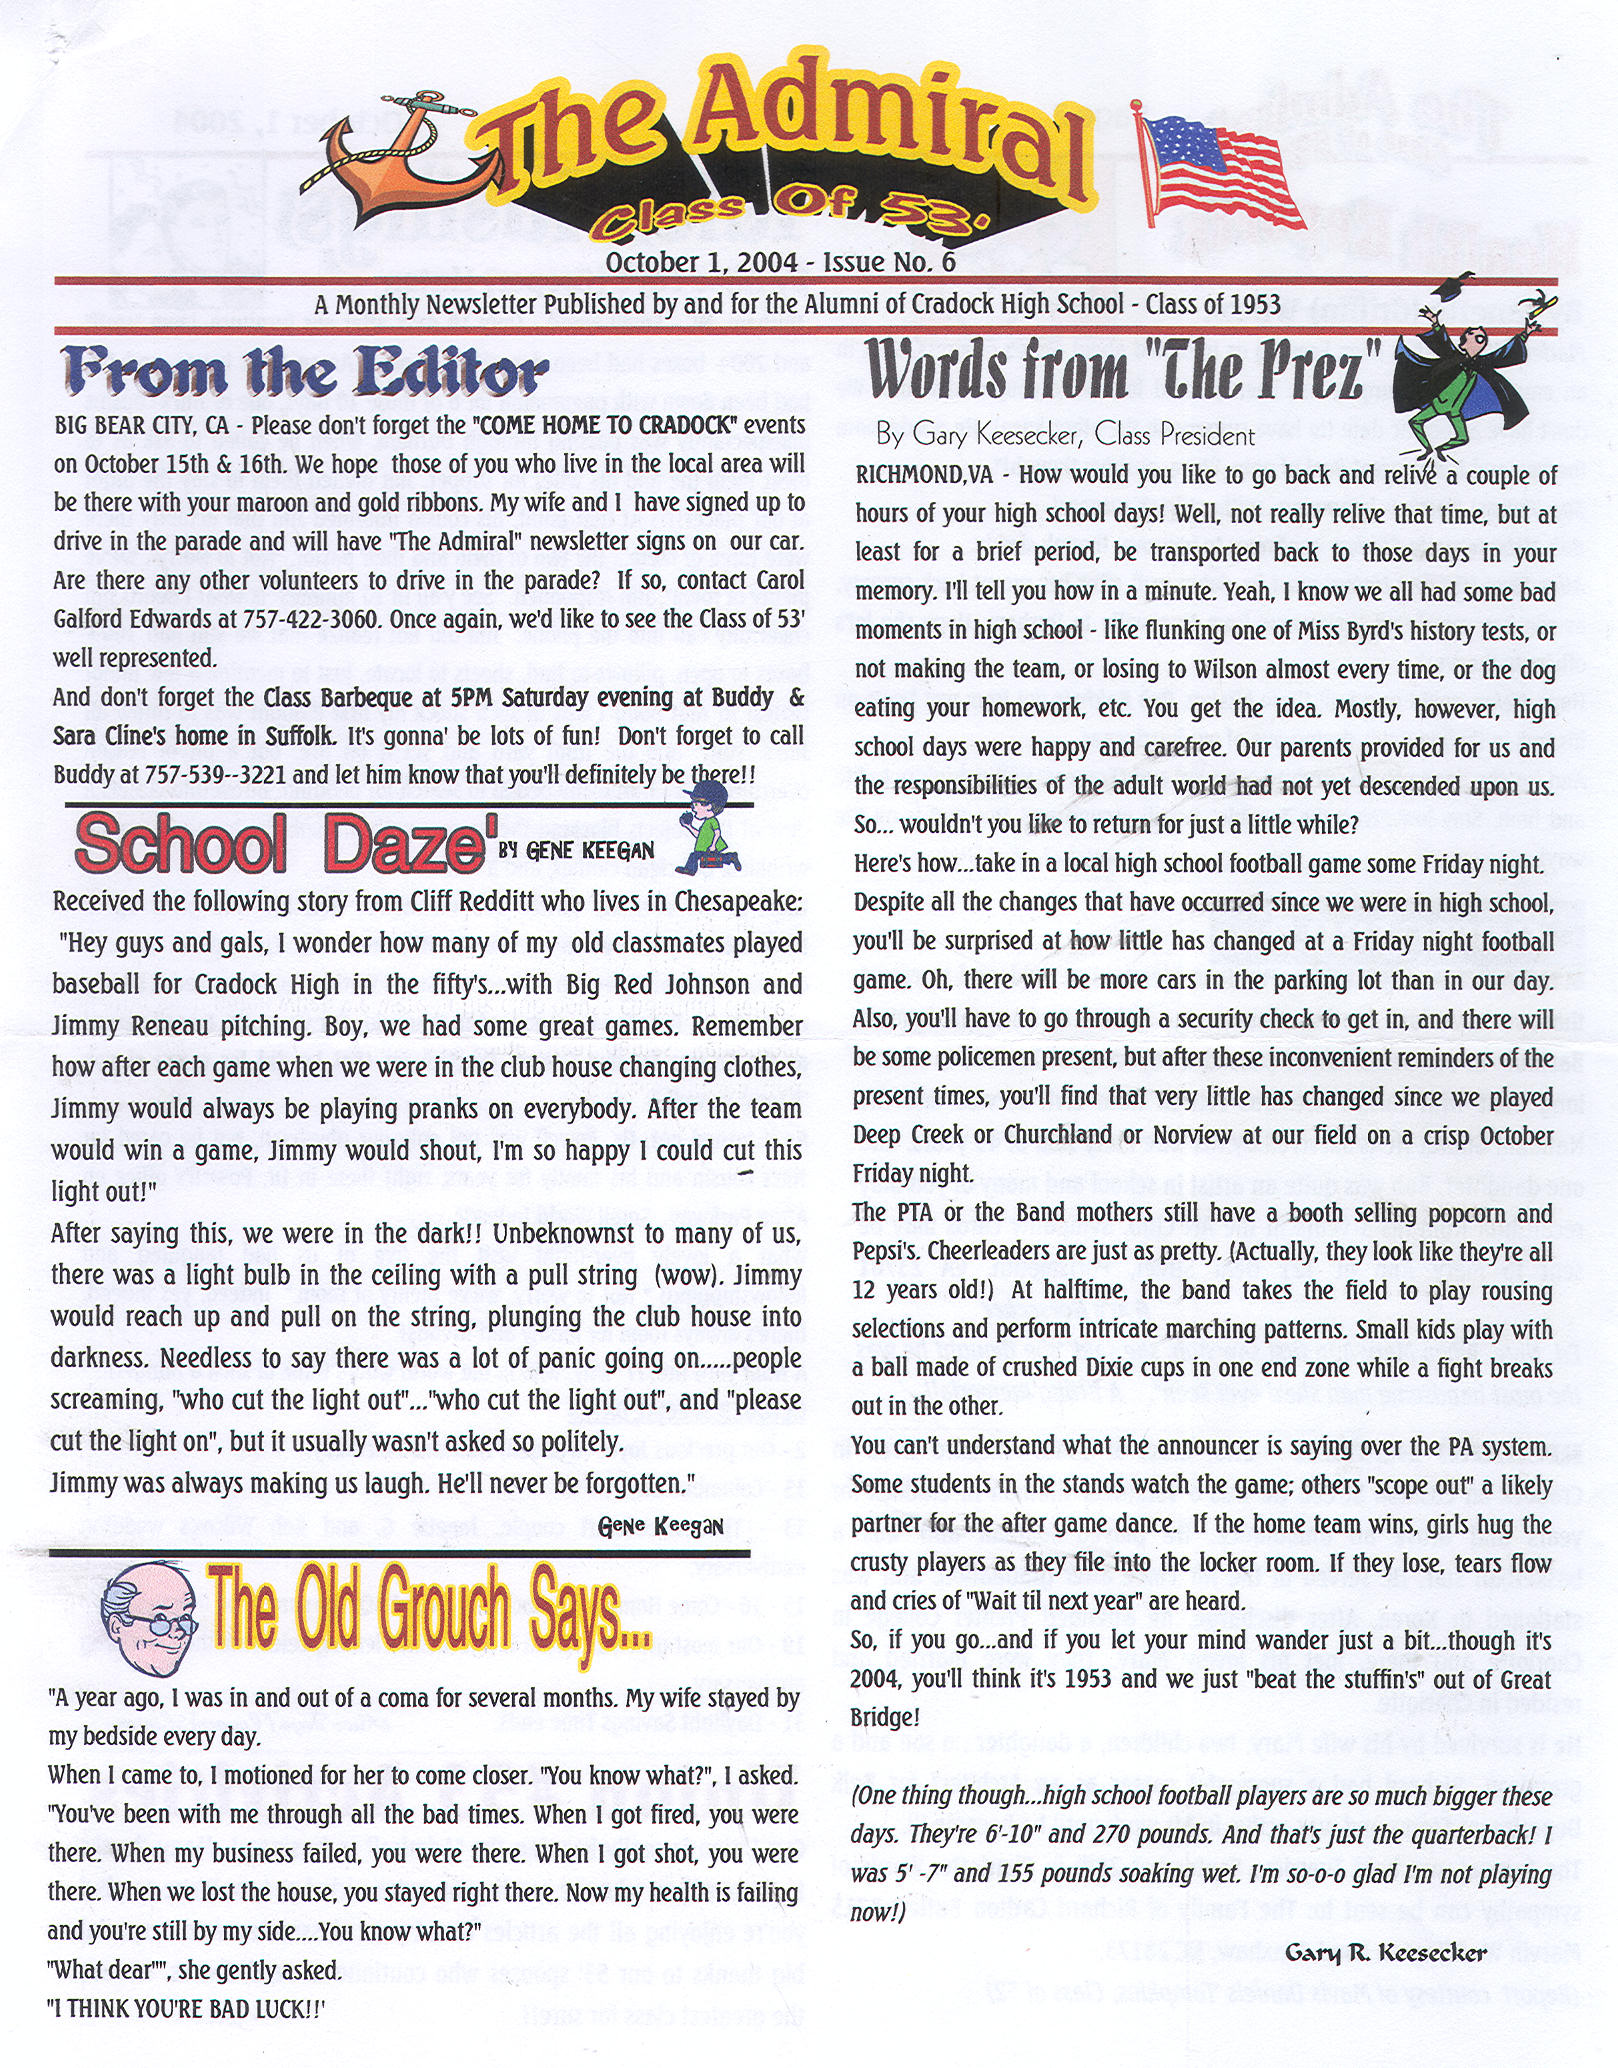 The Admiral - October 2004 - pg. 1